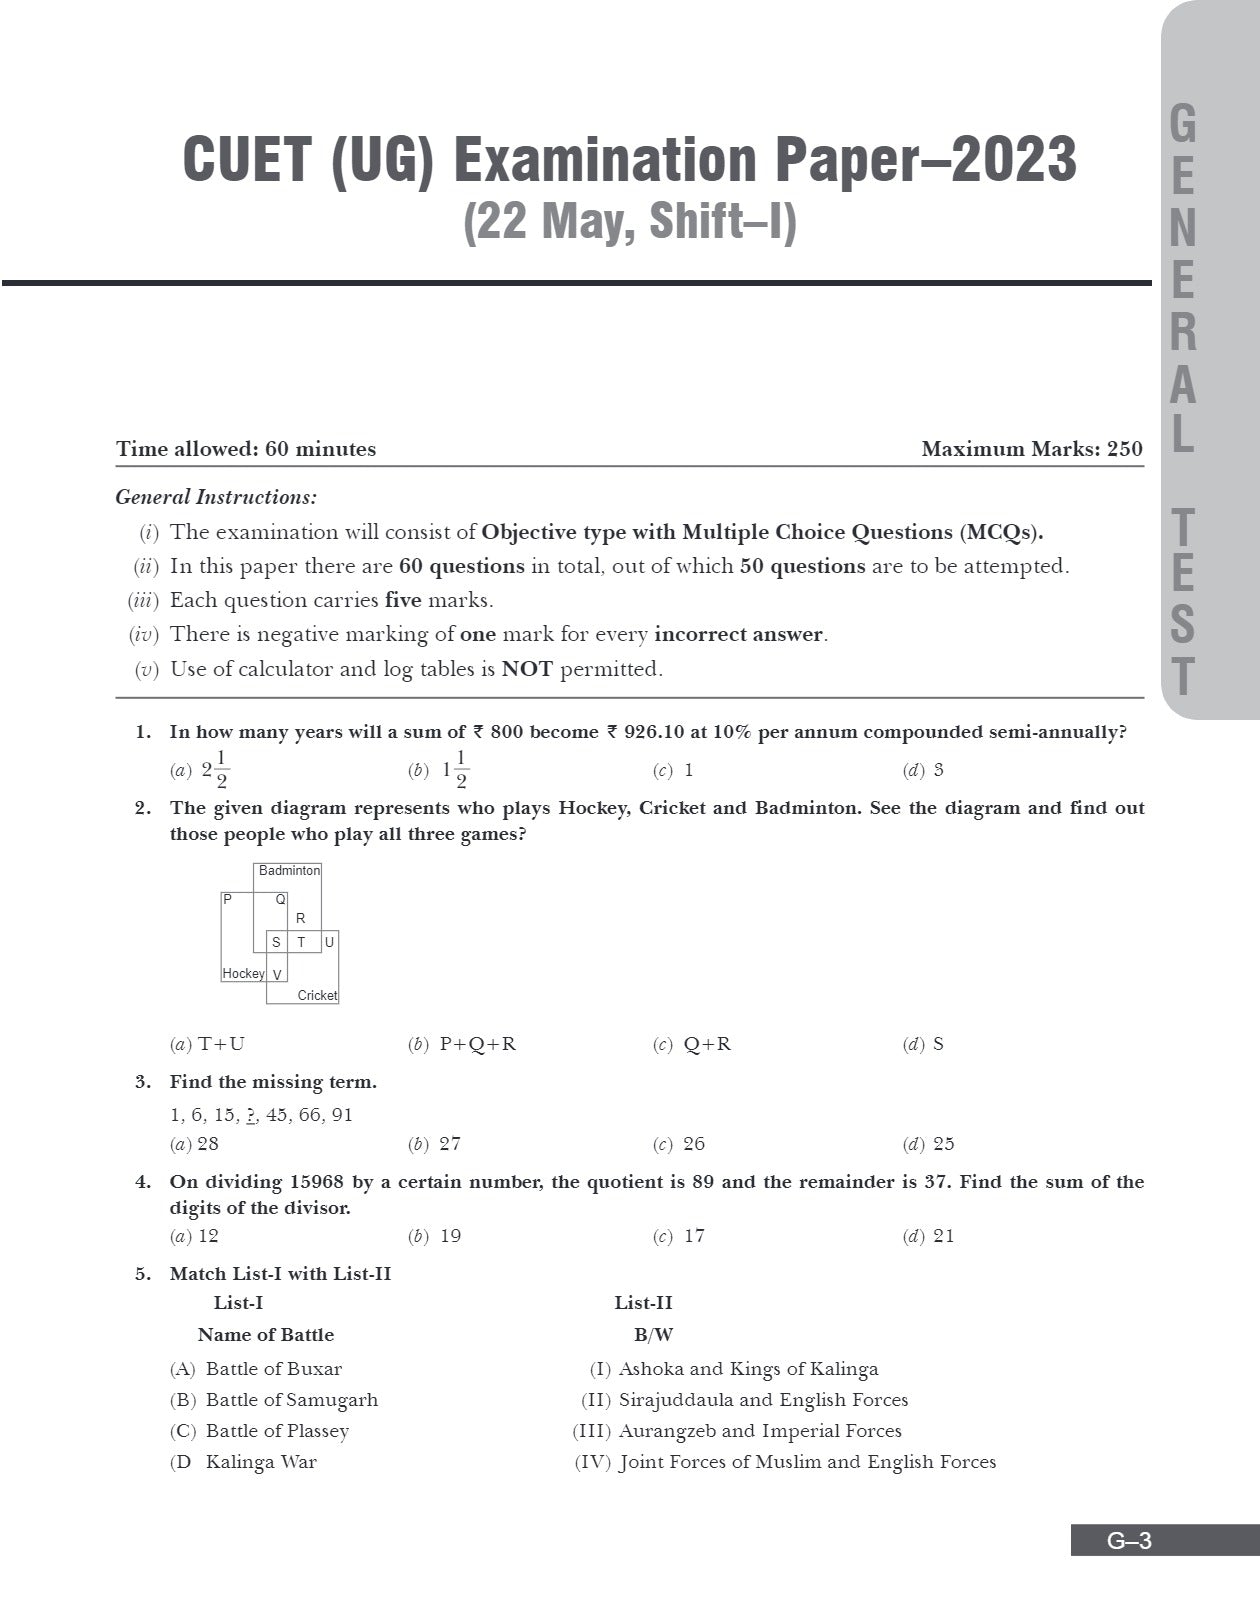 NTA CUET (UG) General Test Book | 10 Sample Papers (Solved) | 5 Mock Test Papers | Common University Entrance Test Section III | Including Solved Previous Year Question Papers (2022, 2023 ) | For Entrance Exam Preparation Book 2024